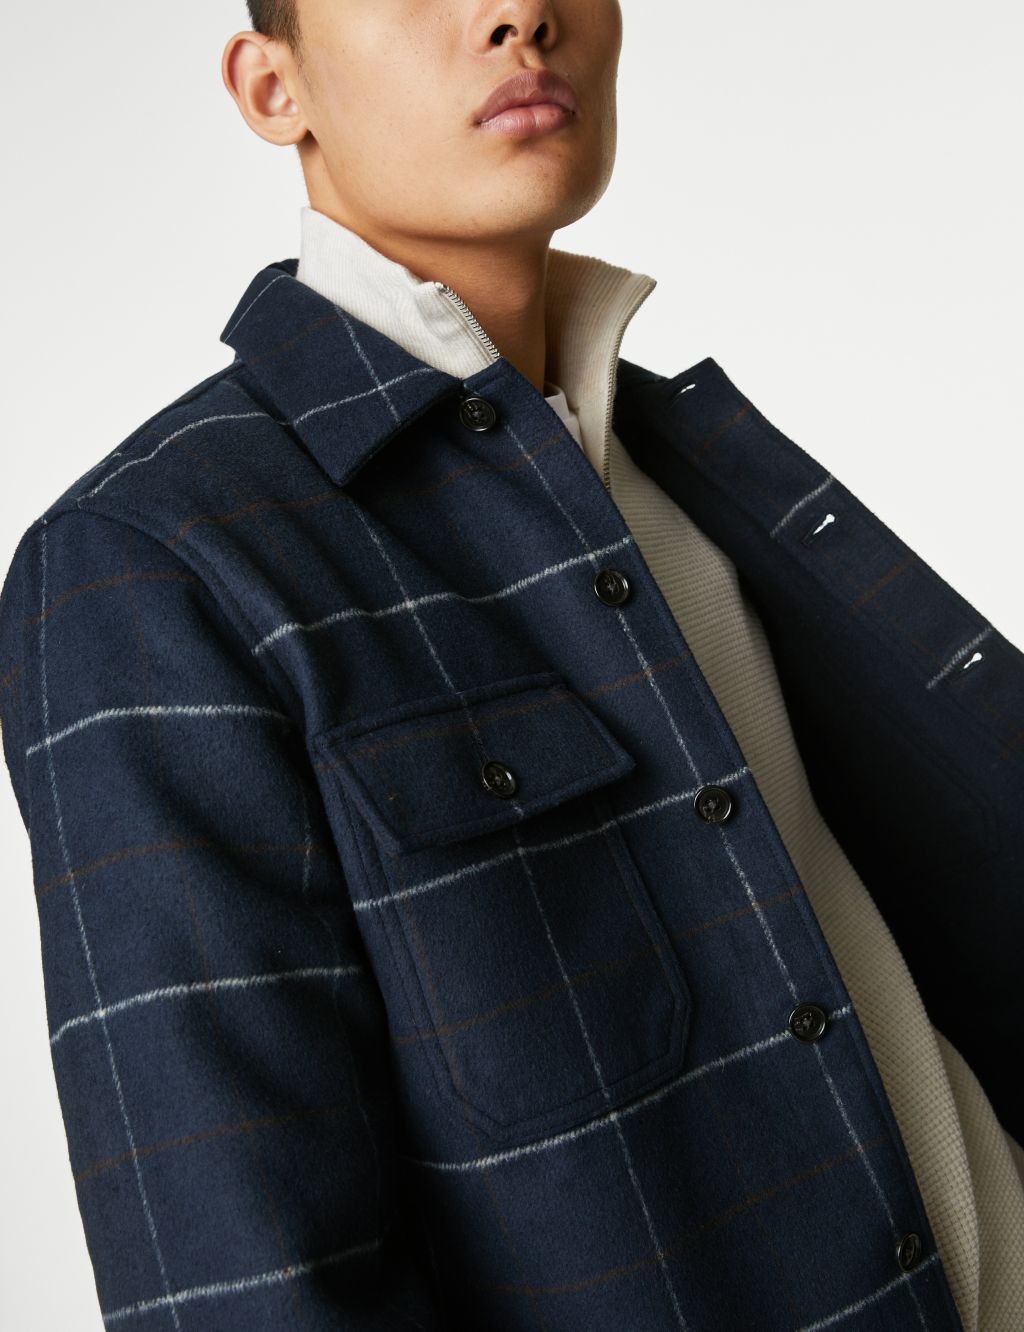 Double Faced Check Overshirt image 4